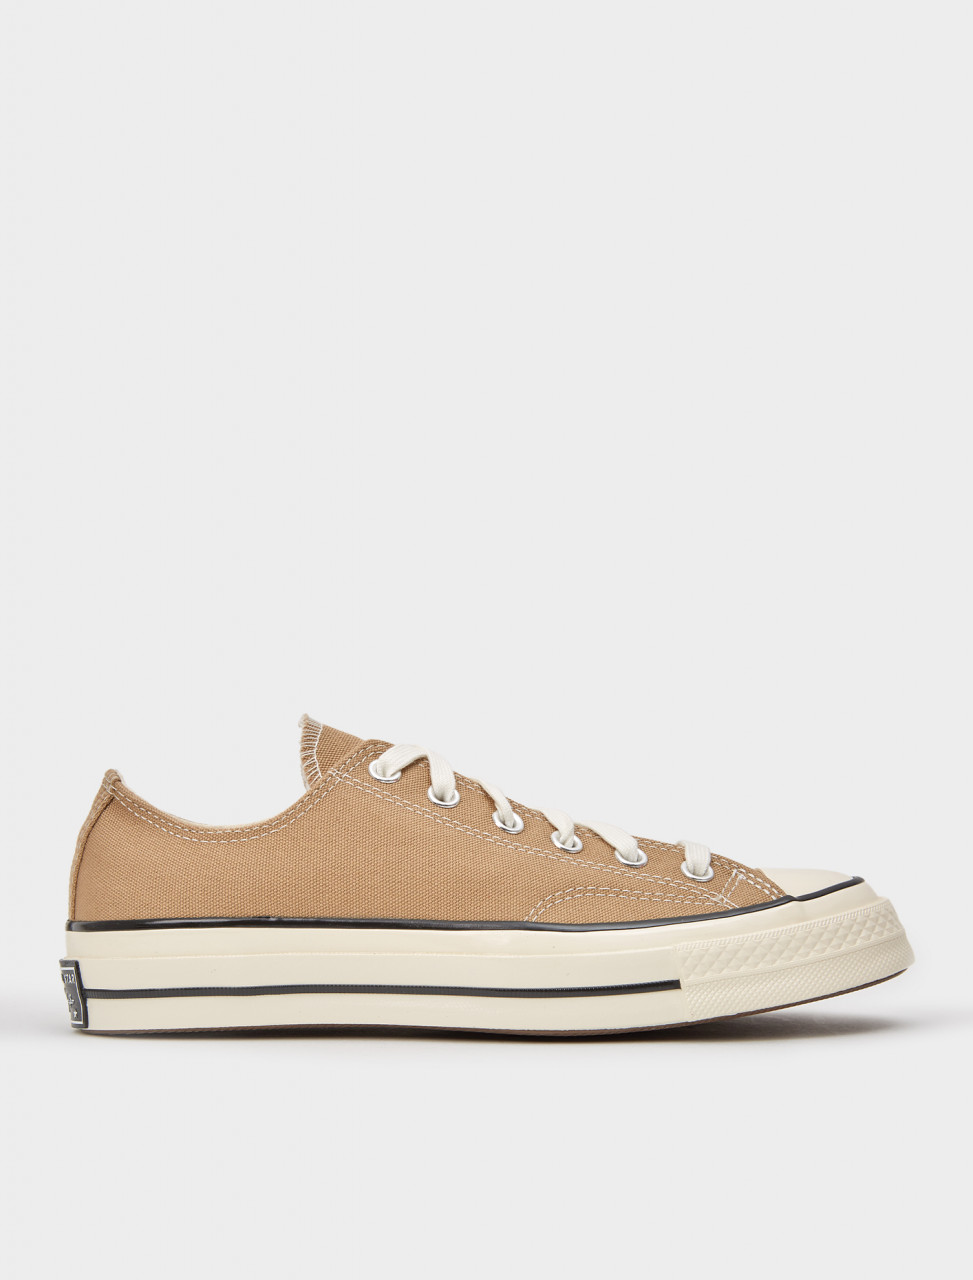 Converse Chuck 70 Ox Sneaker in Nomad 